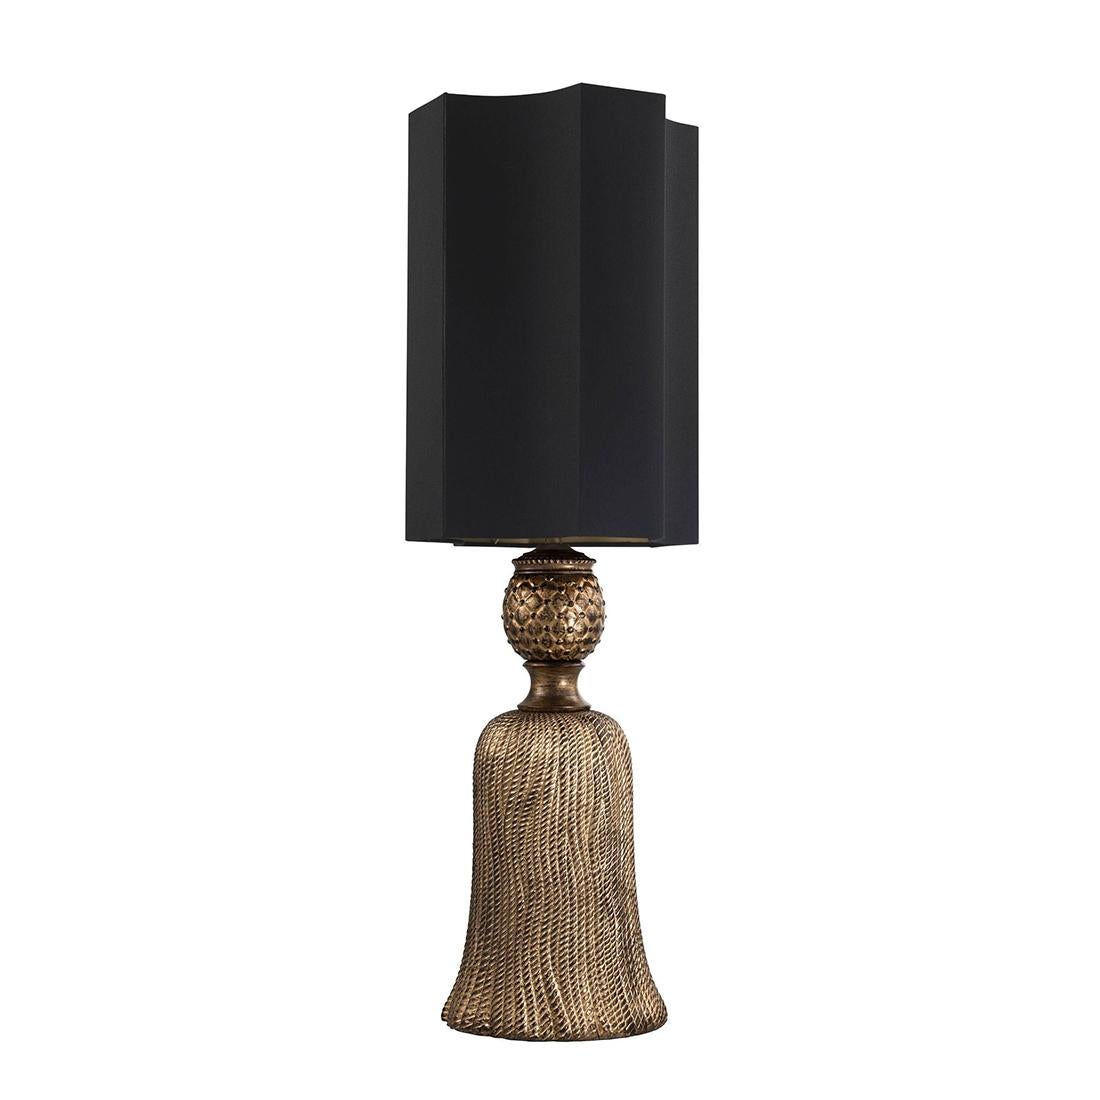 Indian Firenze Table Lamp For Sale